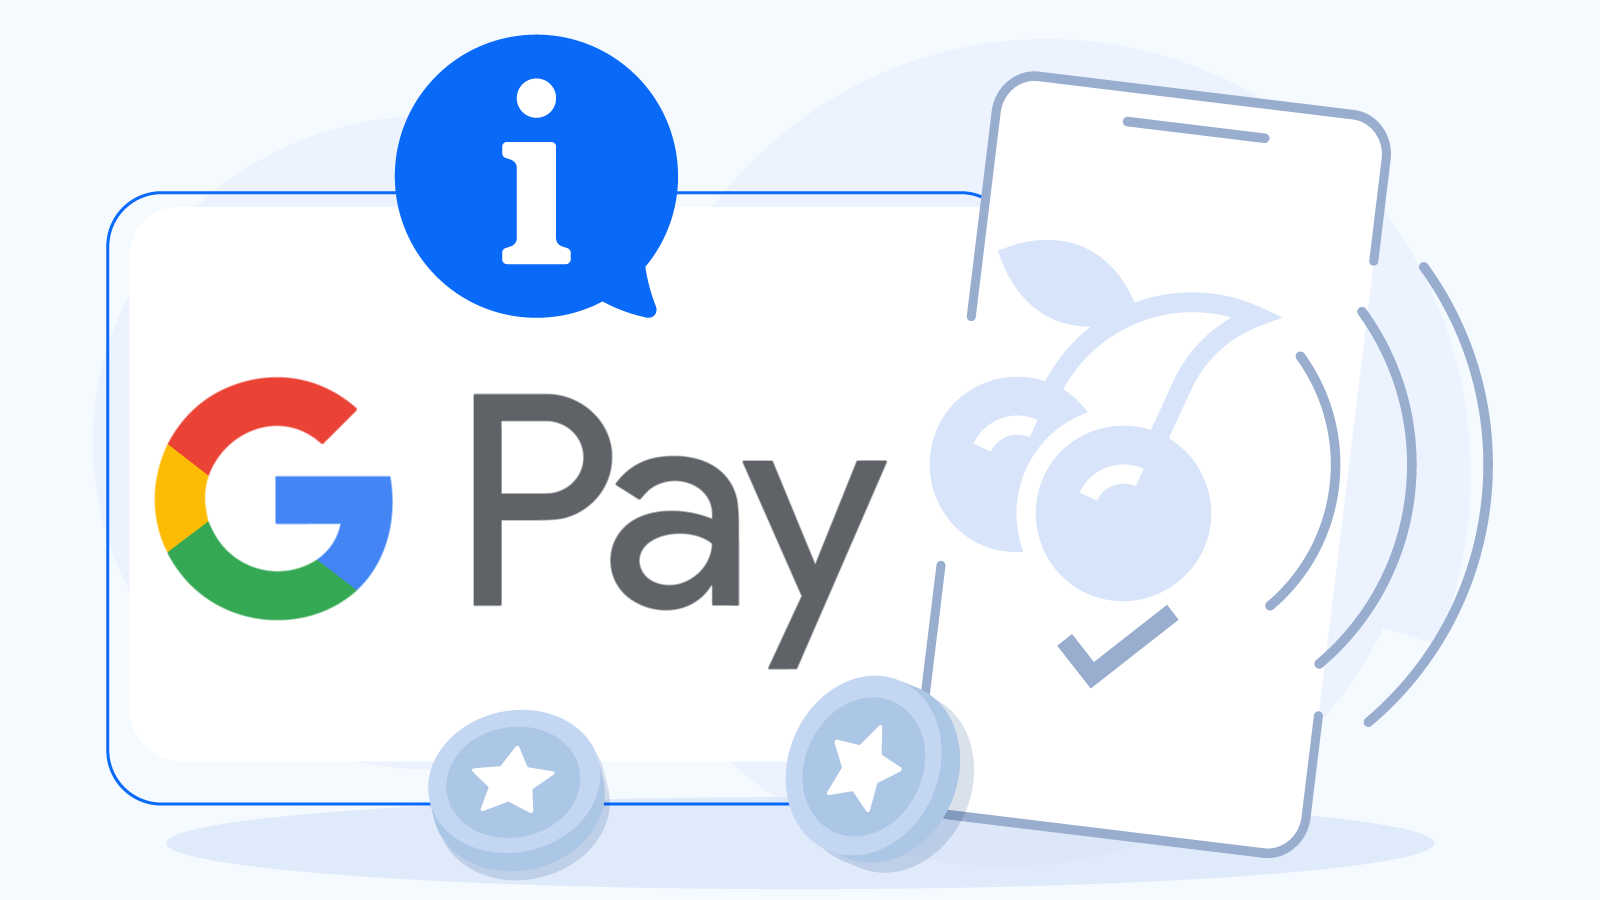 What is Google Pay